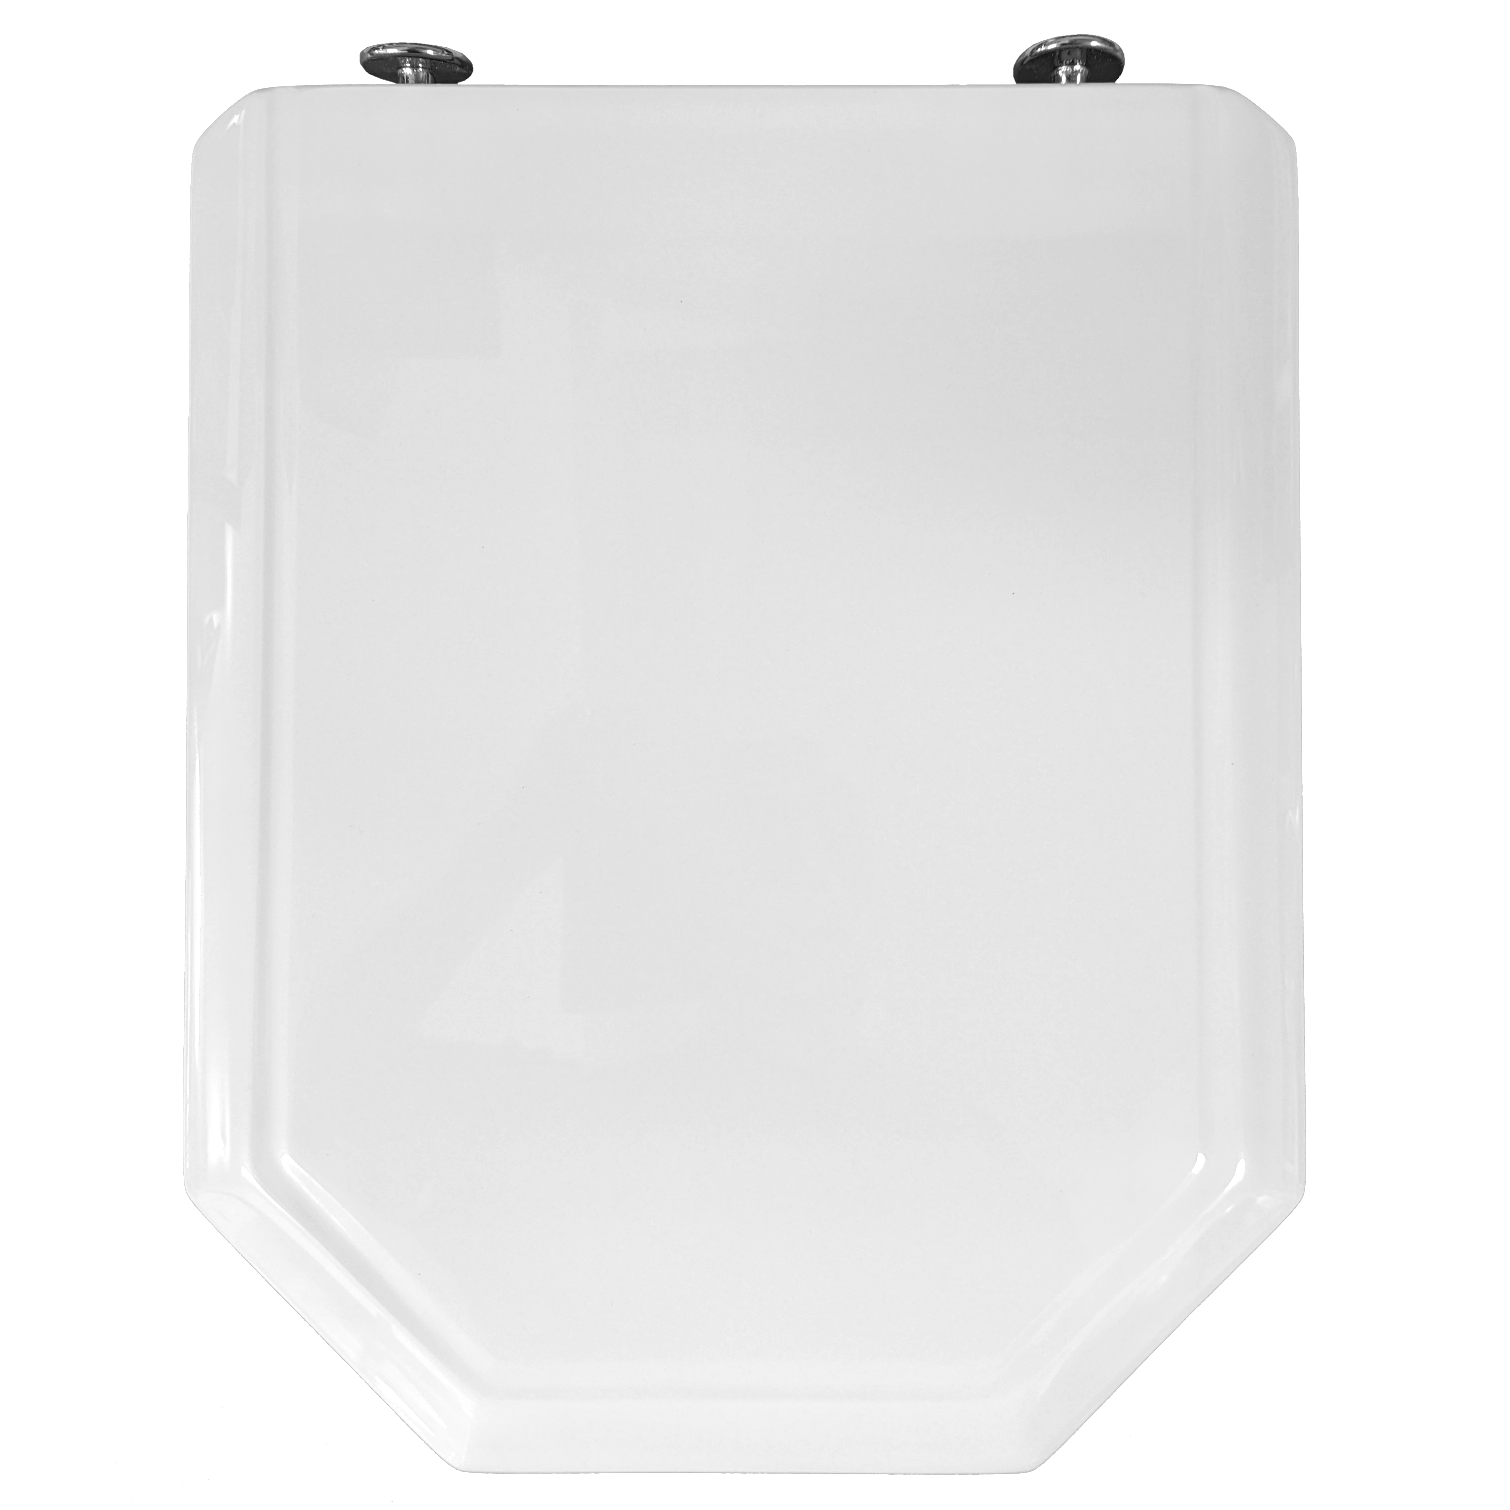 Sedile WC SELLES Equipage 1 (interasse 220 mm), bianco